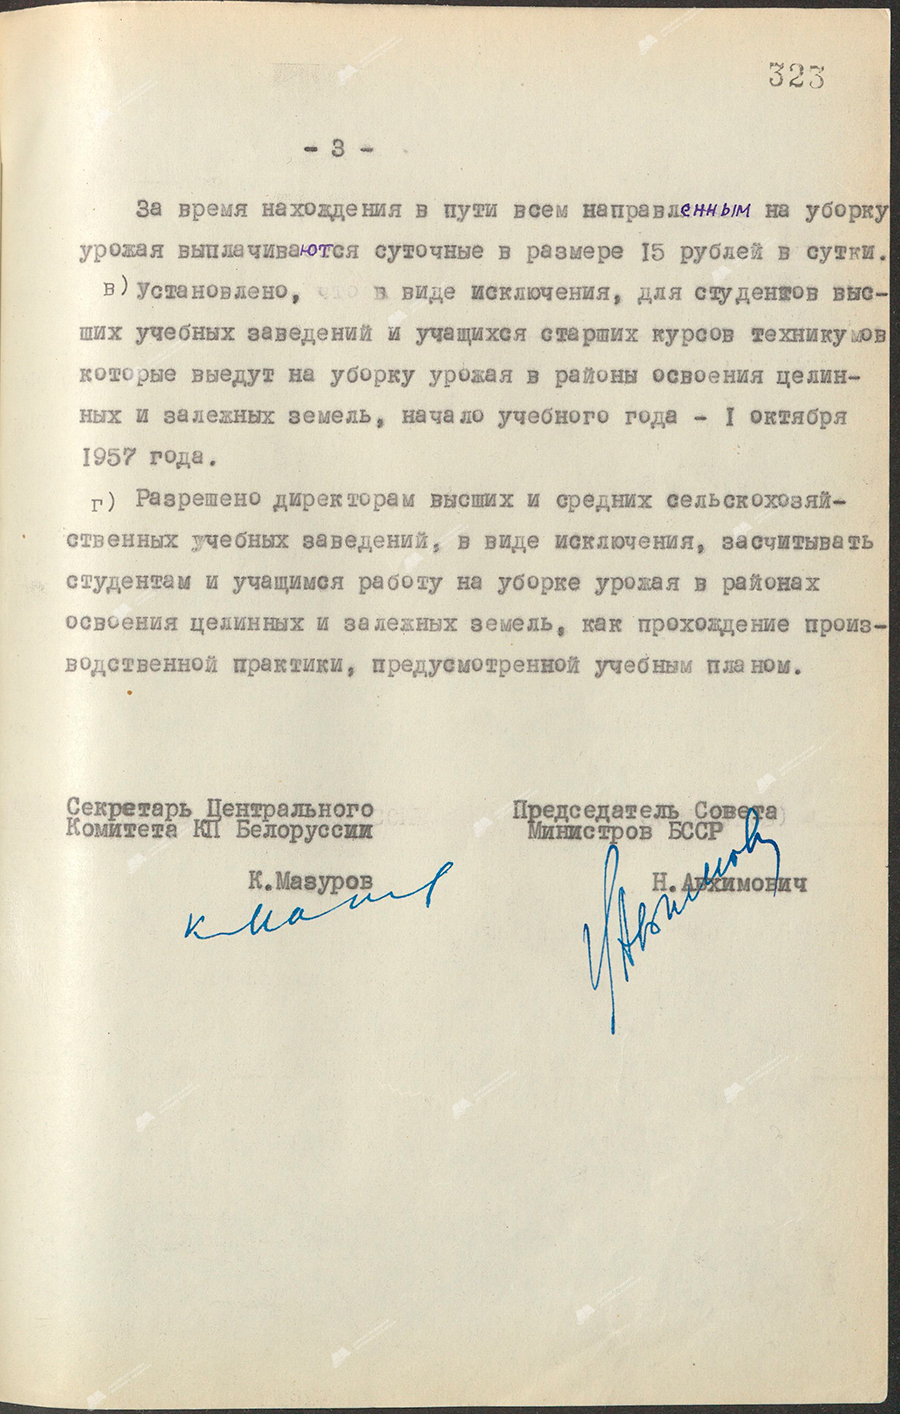 Resolution No. 373 of the Central Committee of the Communist Party of Belarus and the Council of Ministers of the Belarusian SSR «On the participation of Komsomol members and youth of the republic in harvesting in areas of development of virgin and fallow lands in 1957»-стр. 2